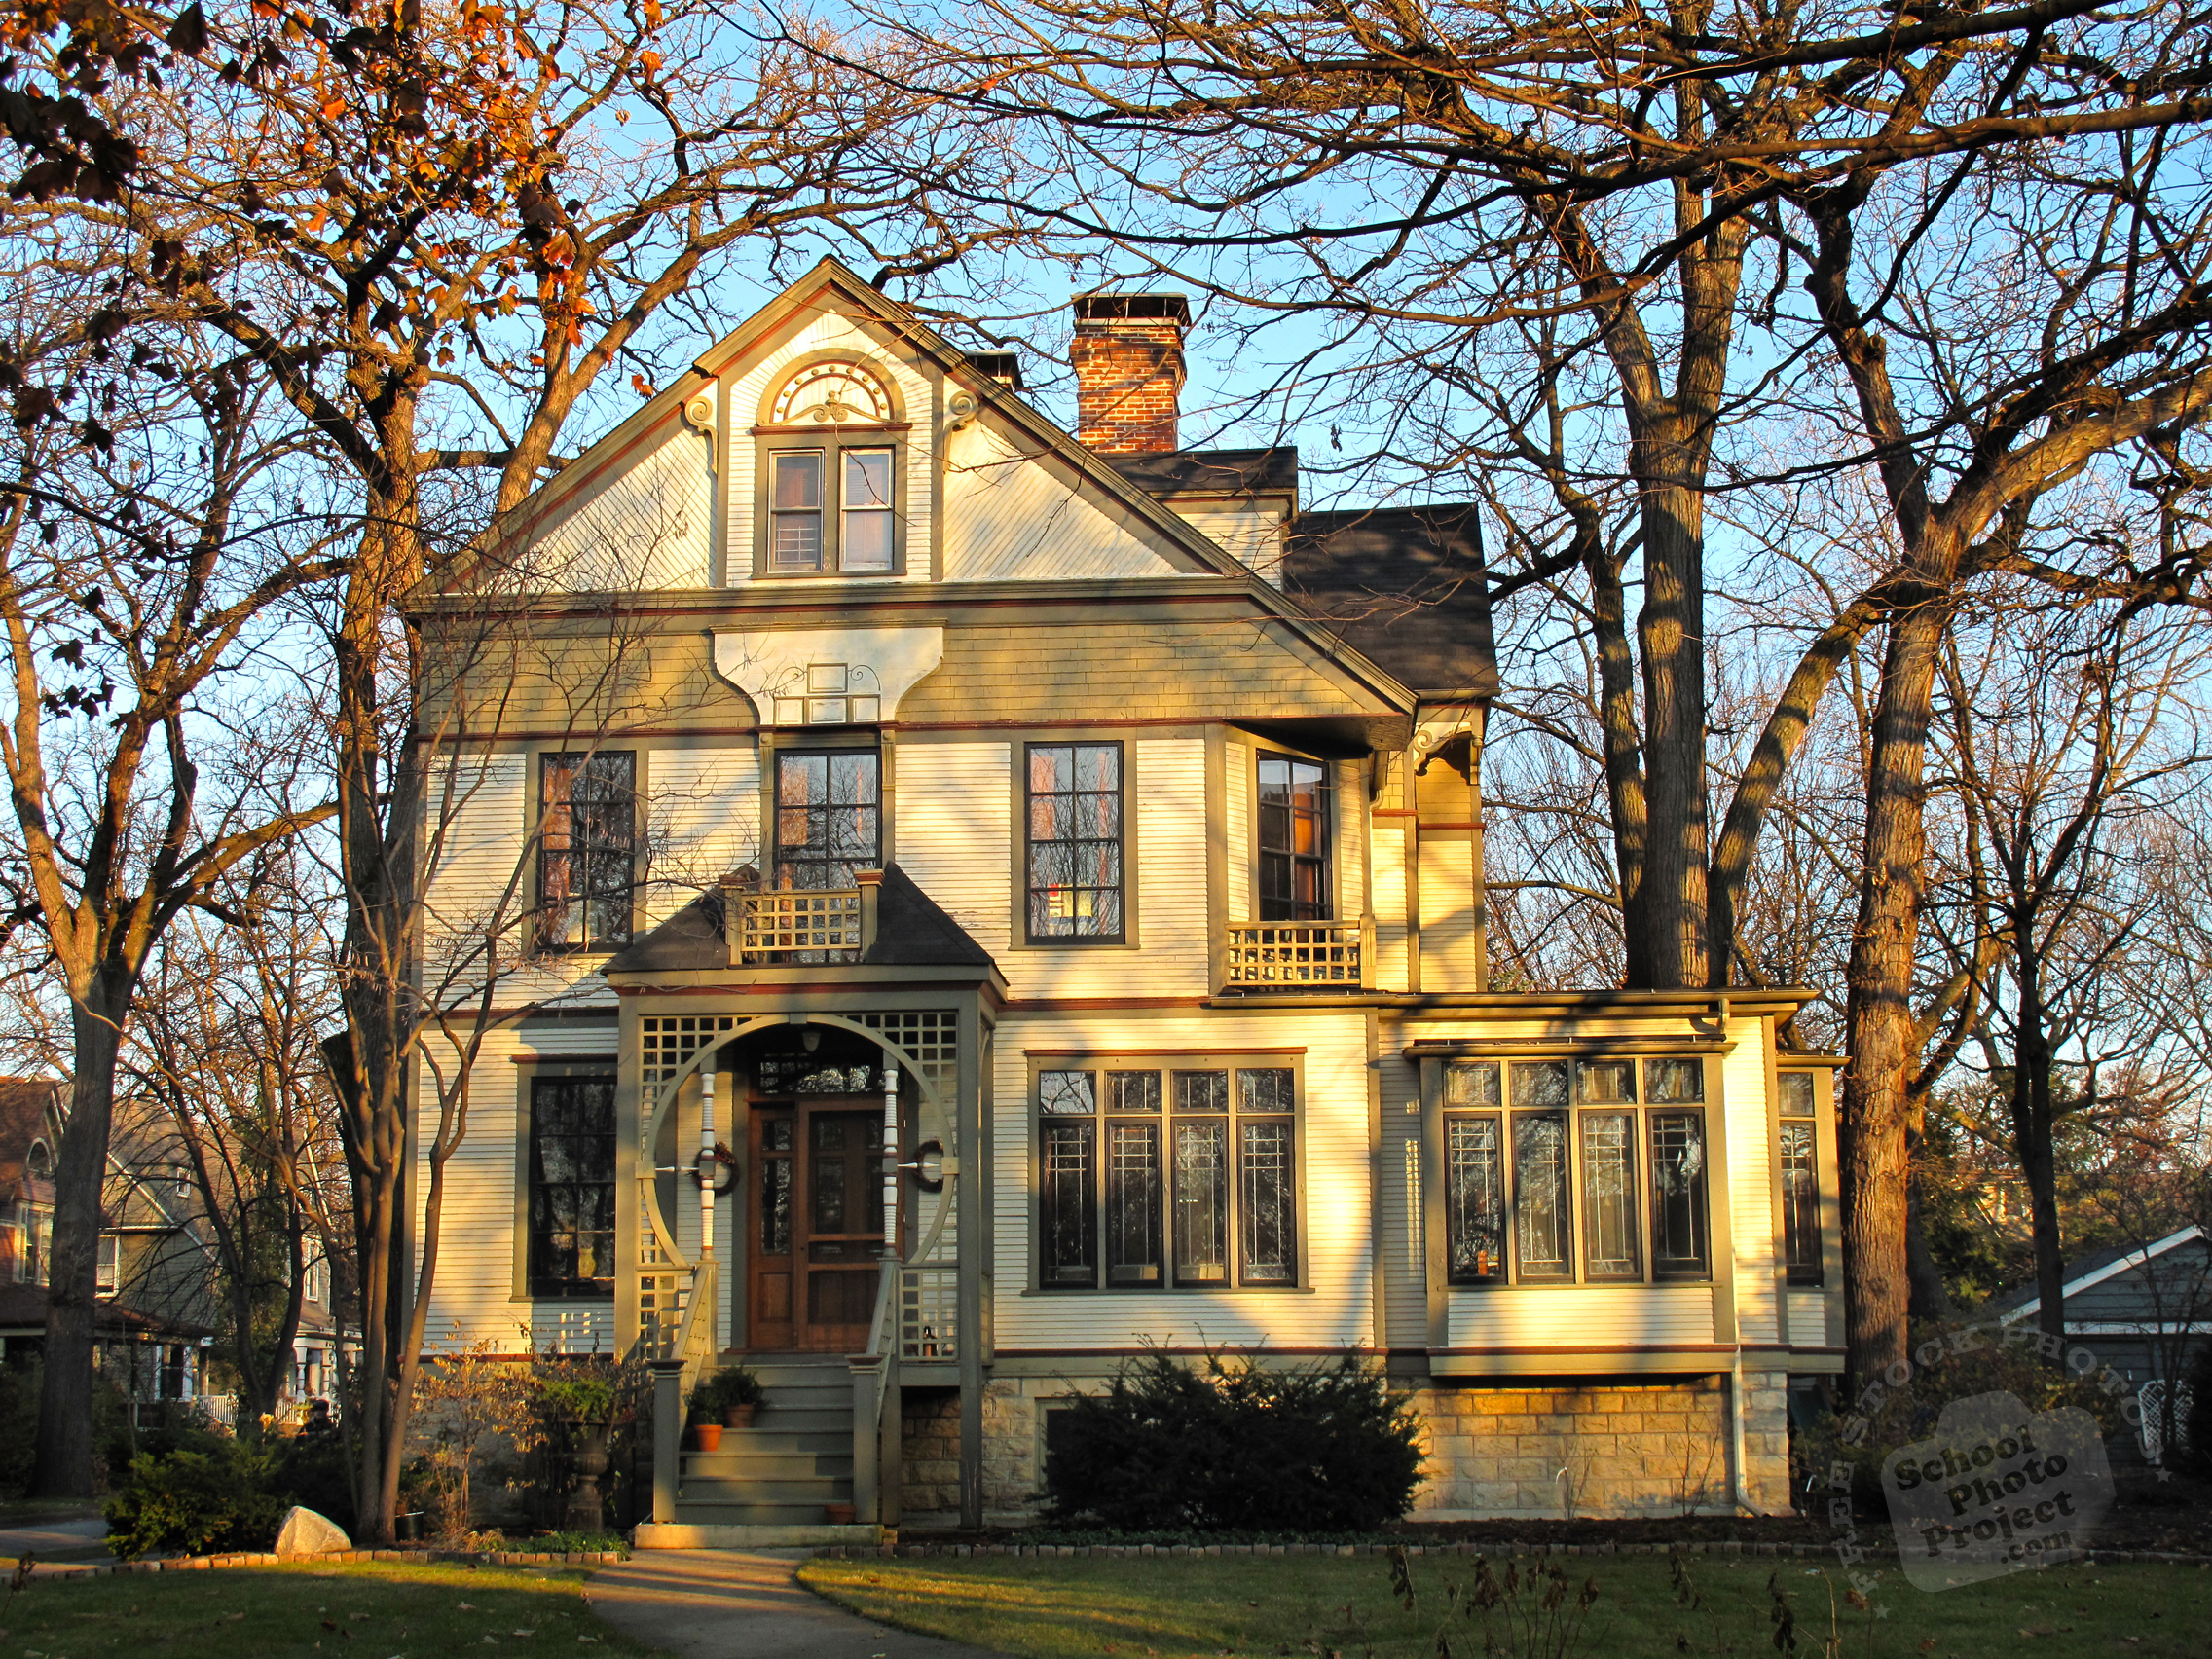 Unique House, FREE Stock Photo, Image, Picture: Victorian Regency Style